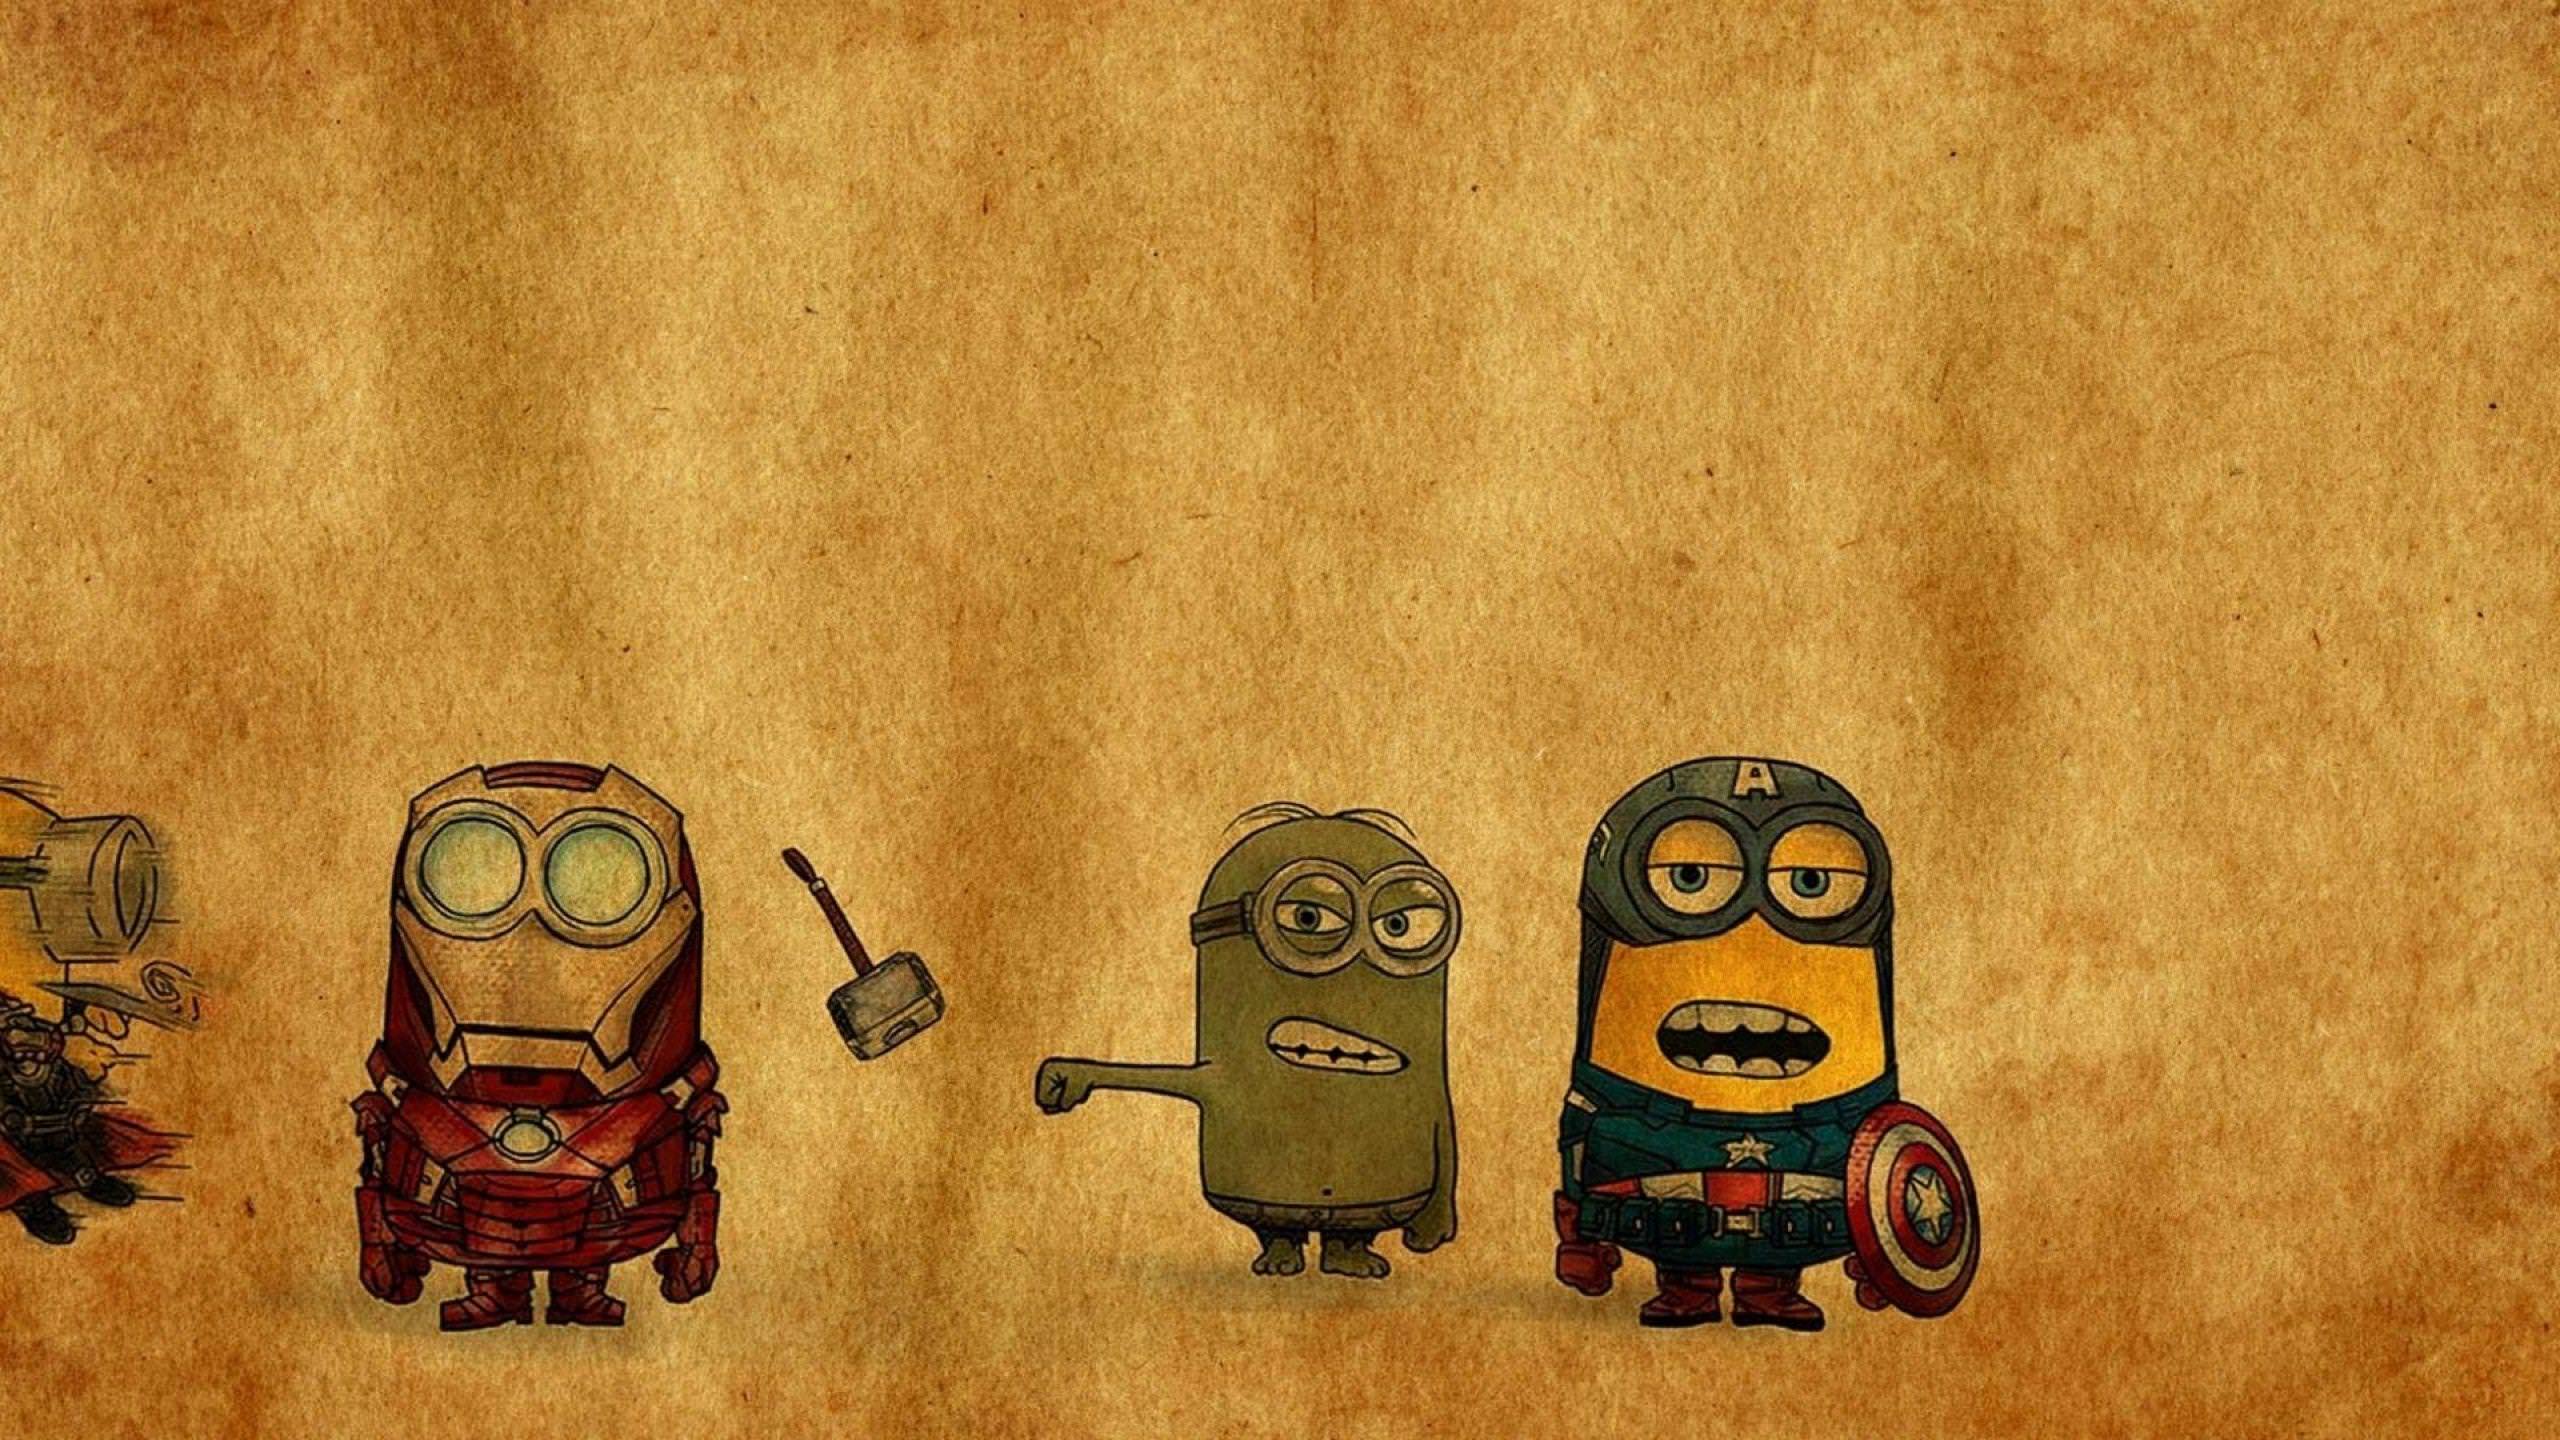 Minion Wallpapers 1920x1080  Wallpaper Cave